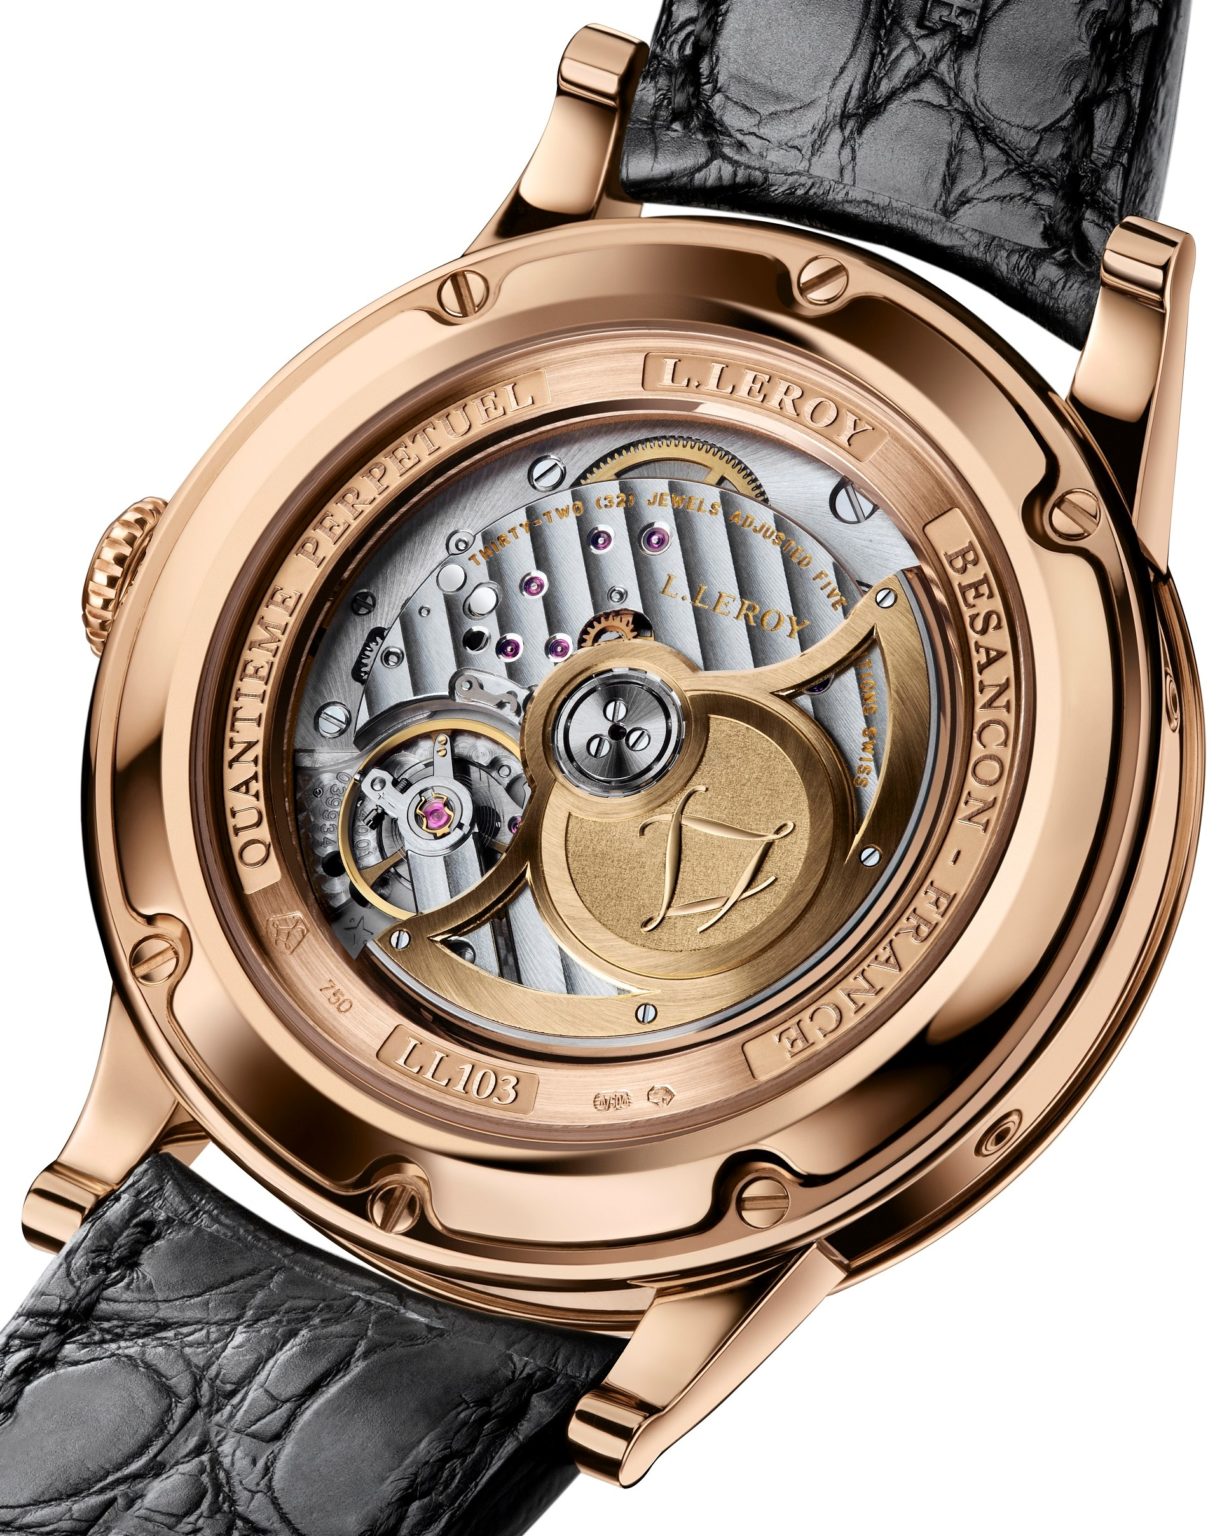 Showing at WatchTime New York 2021: L. Leroy Osmior Retrograde ...